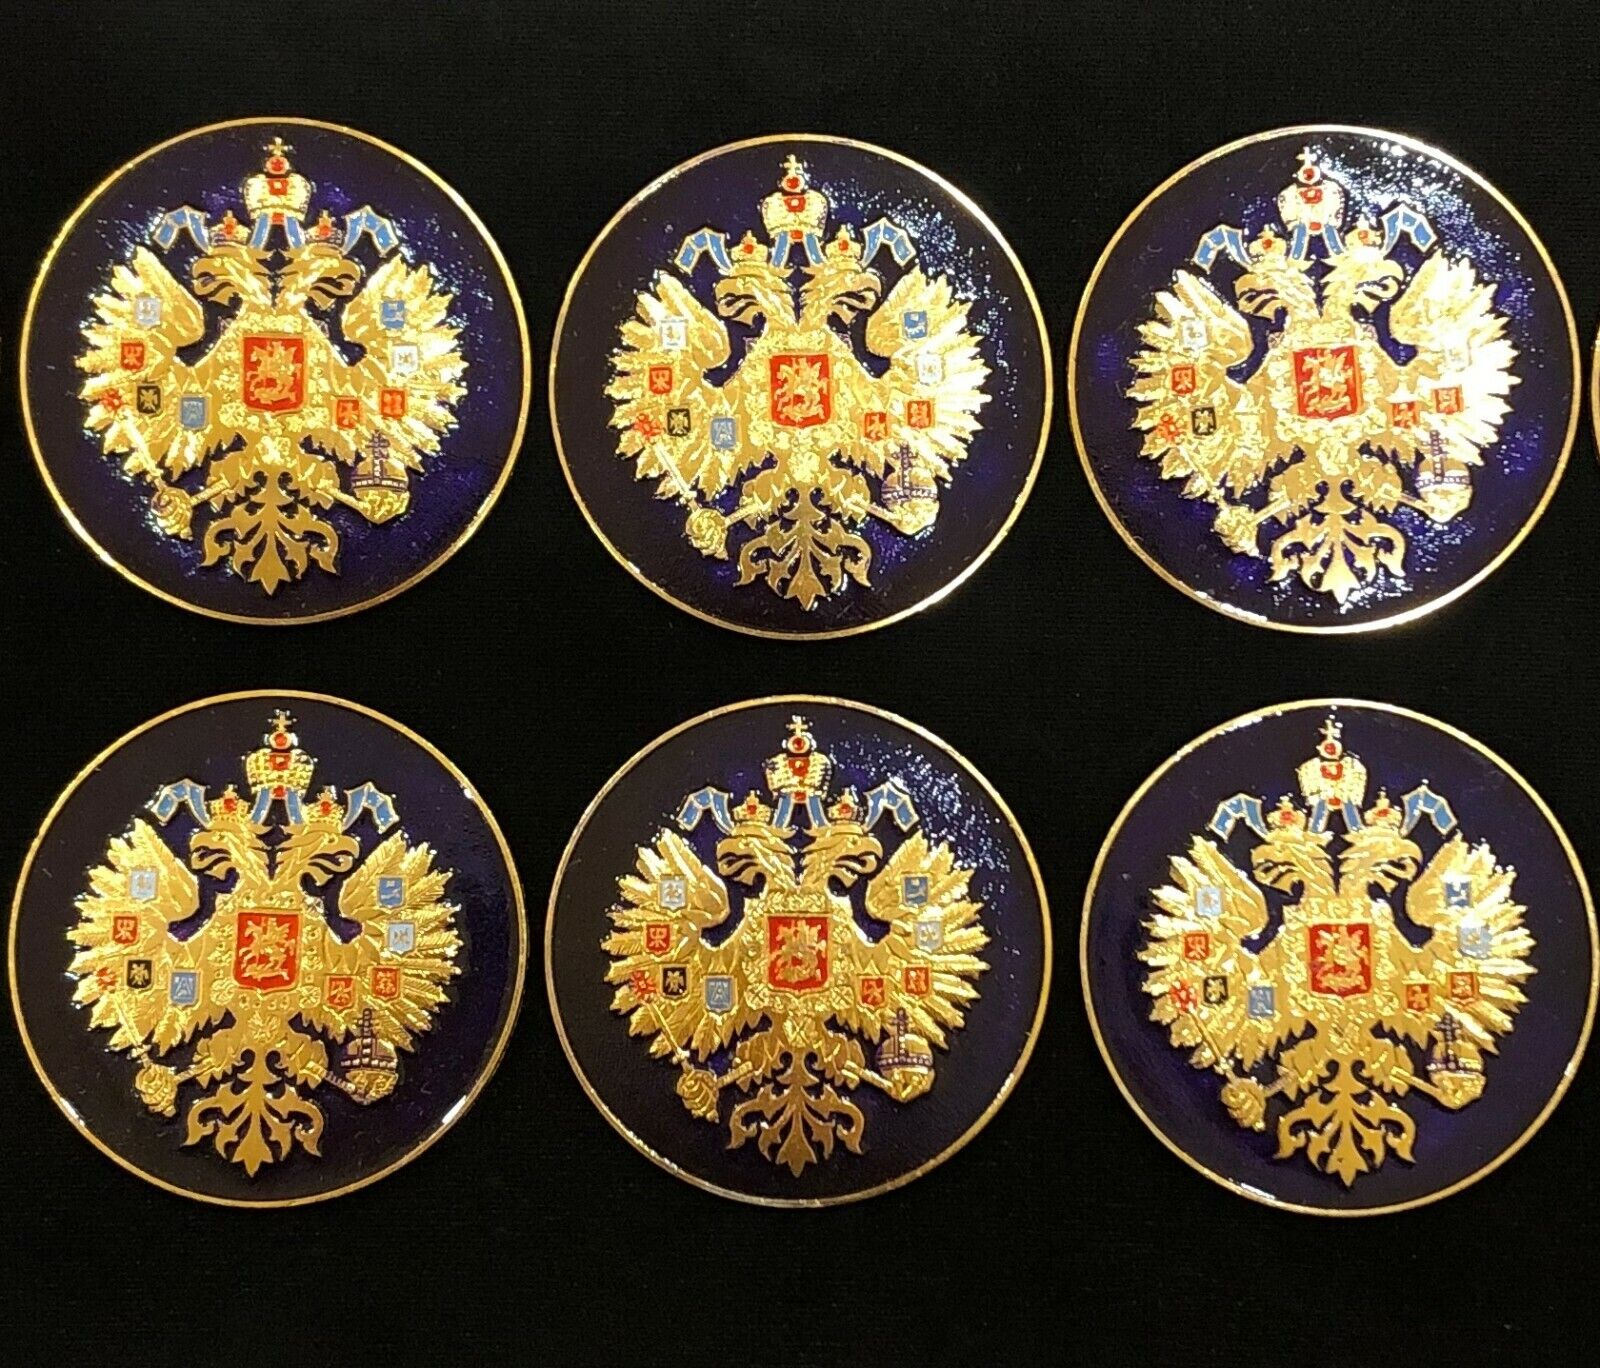 RUSSIAN IMPERIAL EAGLE. RUSSIA COAT OF ARMS CREST BADGE. Lot Of 6